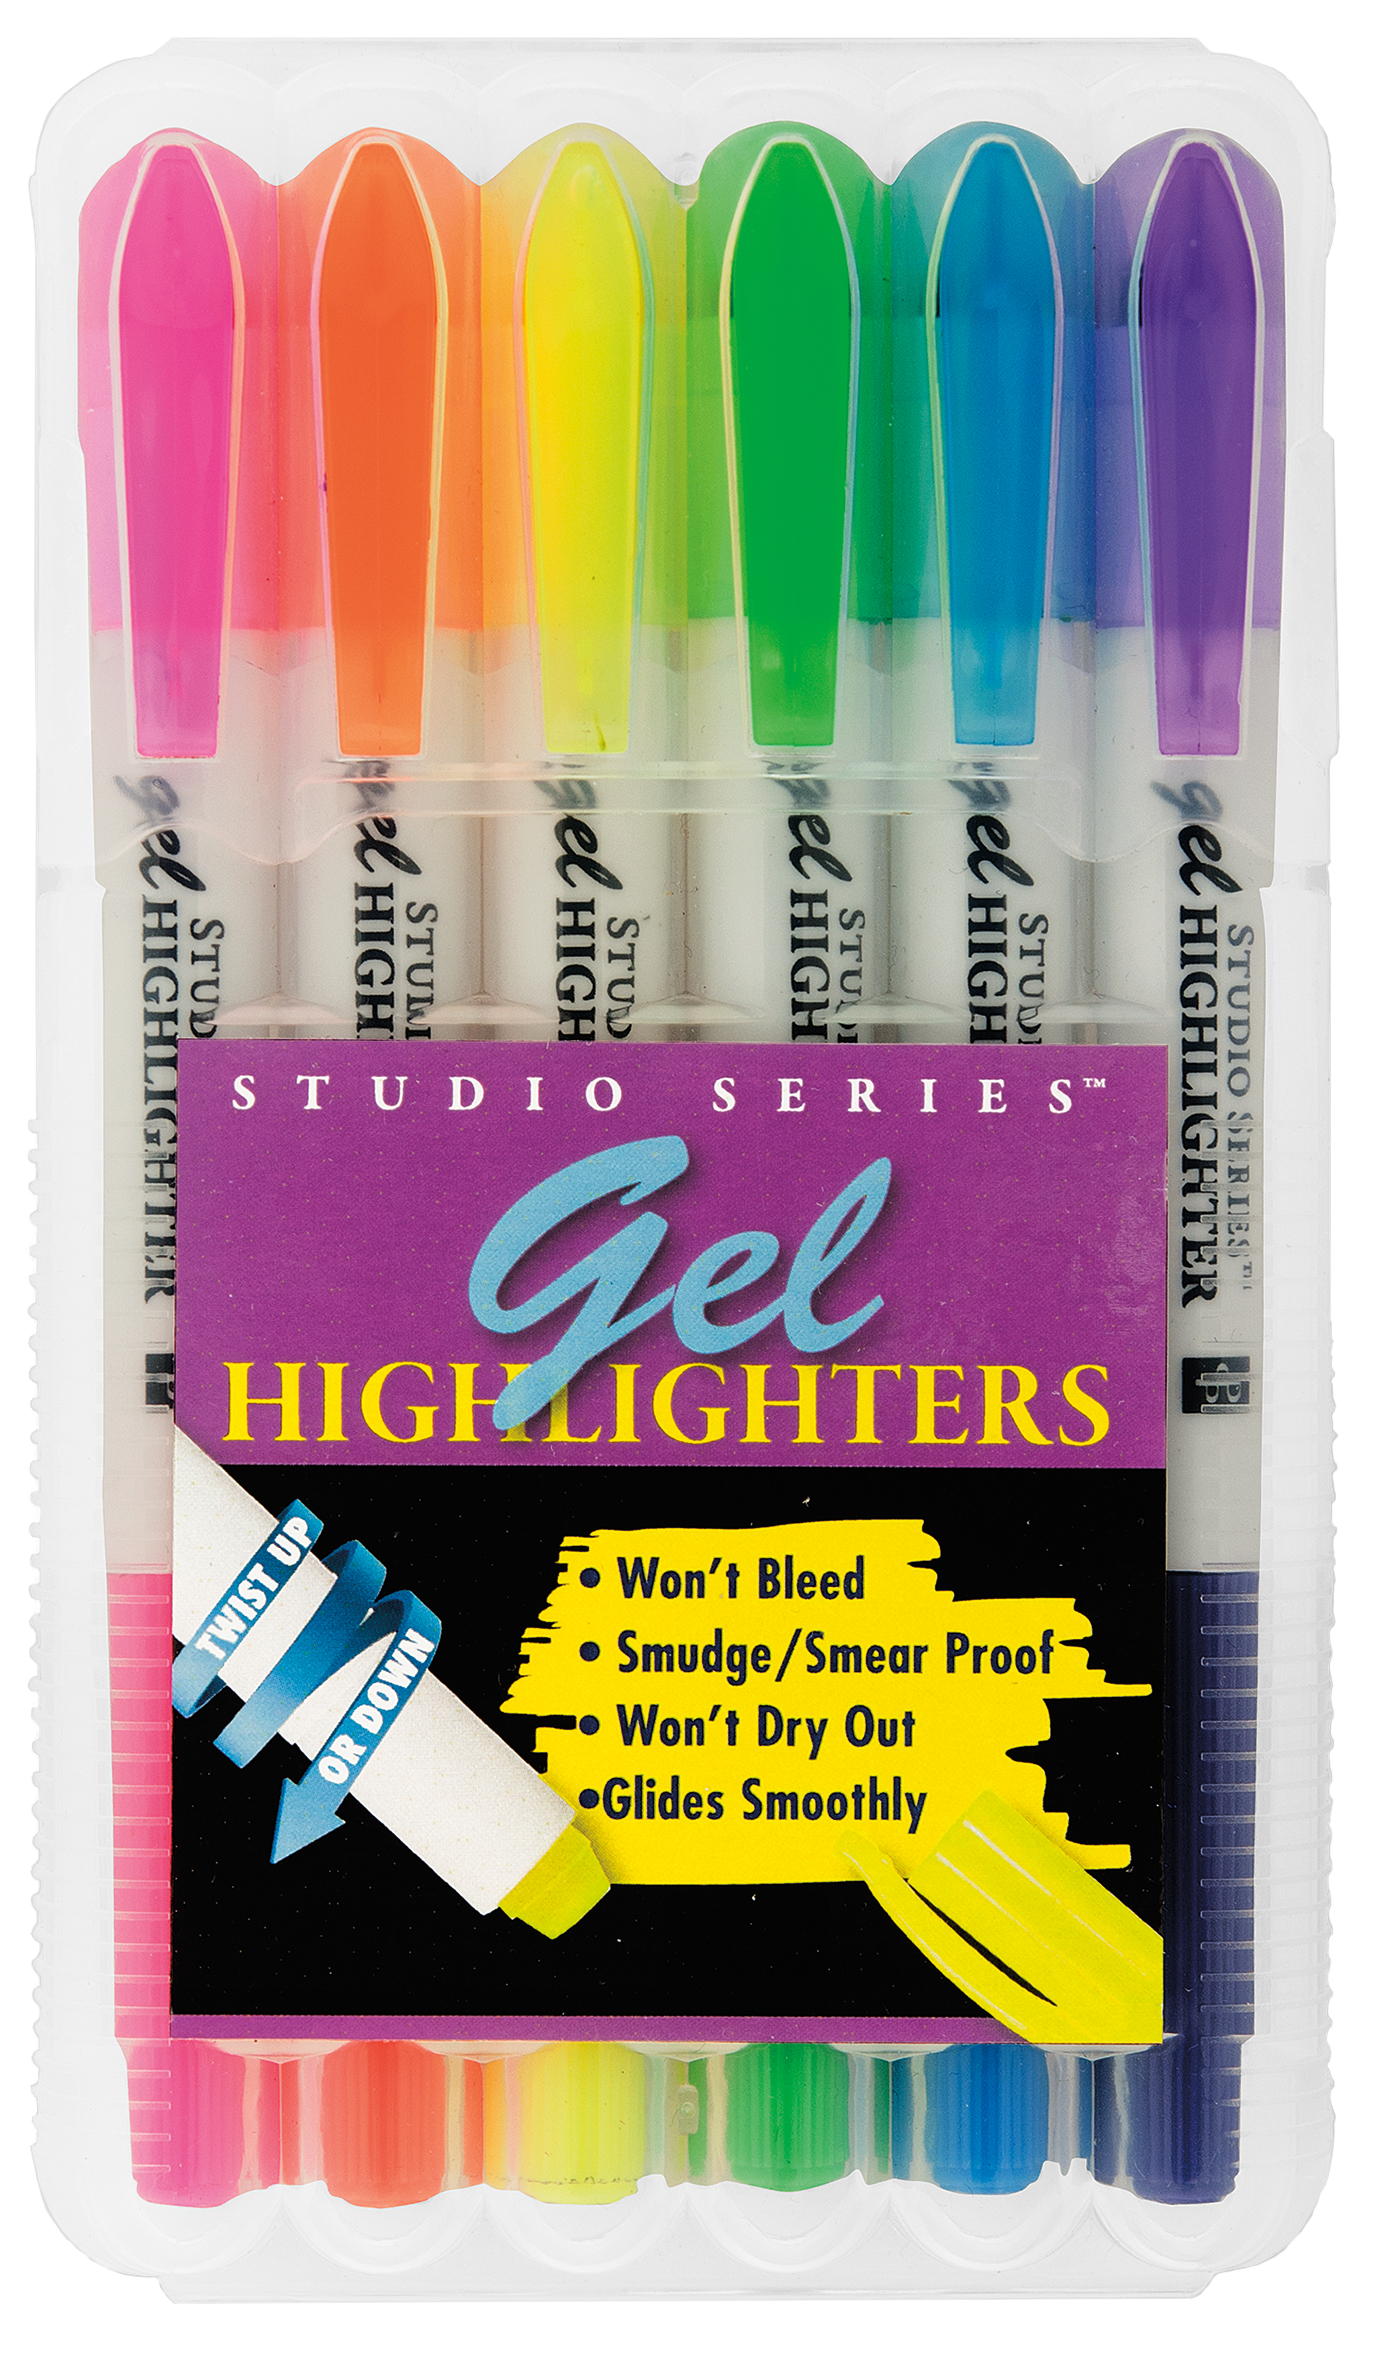 Bible Safe Gel Highlighters, Fluorescent Colors - Yellow, Orange, Pink,  Blue, Green, Purple, 6 Highlighters - King Soopers